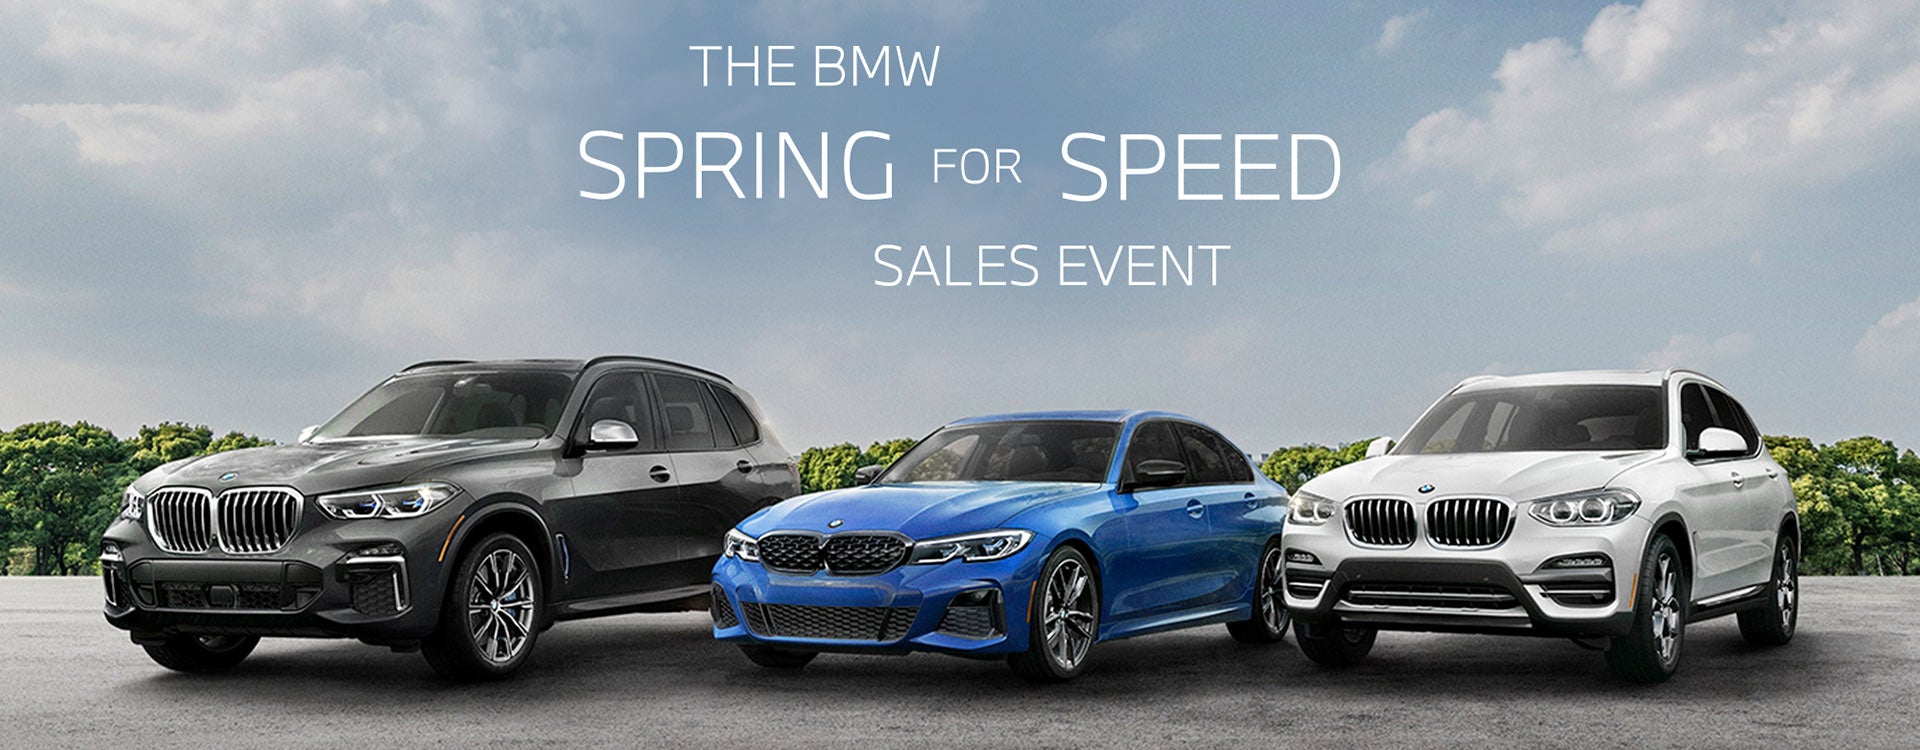 Spring For Speed Sales Event | Bachrodt BMW in Rockford IL